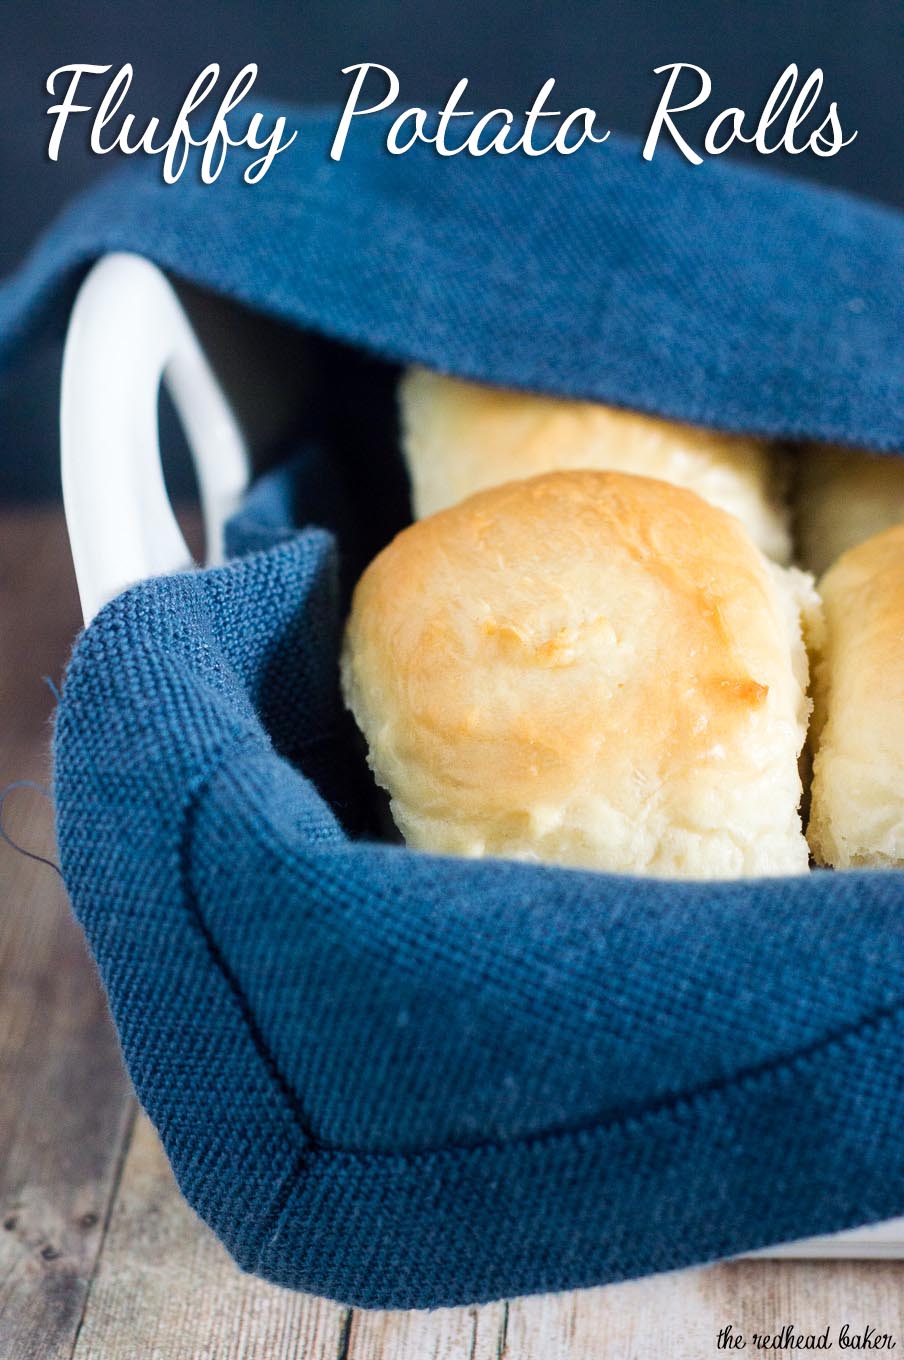 Fluffy potato rolls are soft, light and more flavorful than plain rolls. They stay soft for several days, so they're ideal for Thanksgiving. #SundaySupper